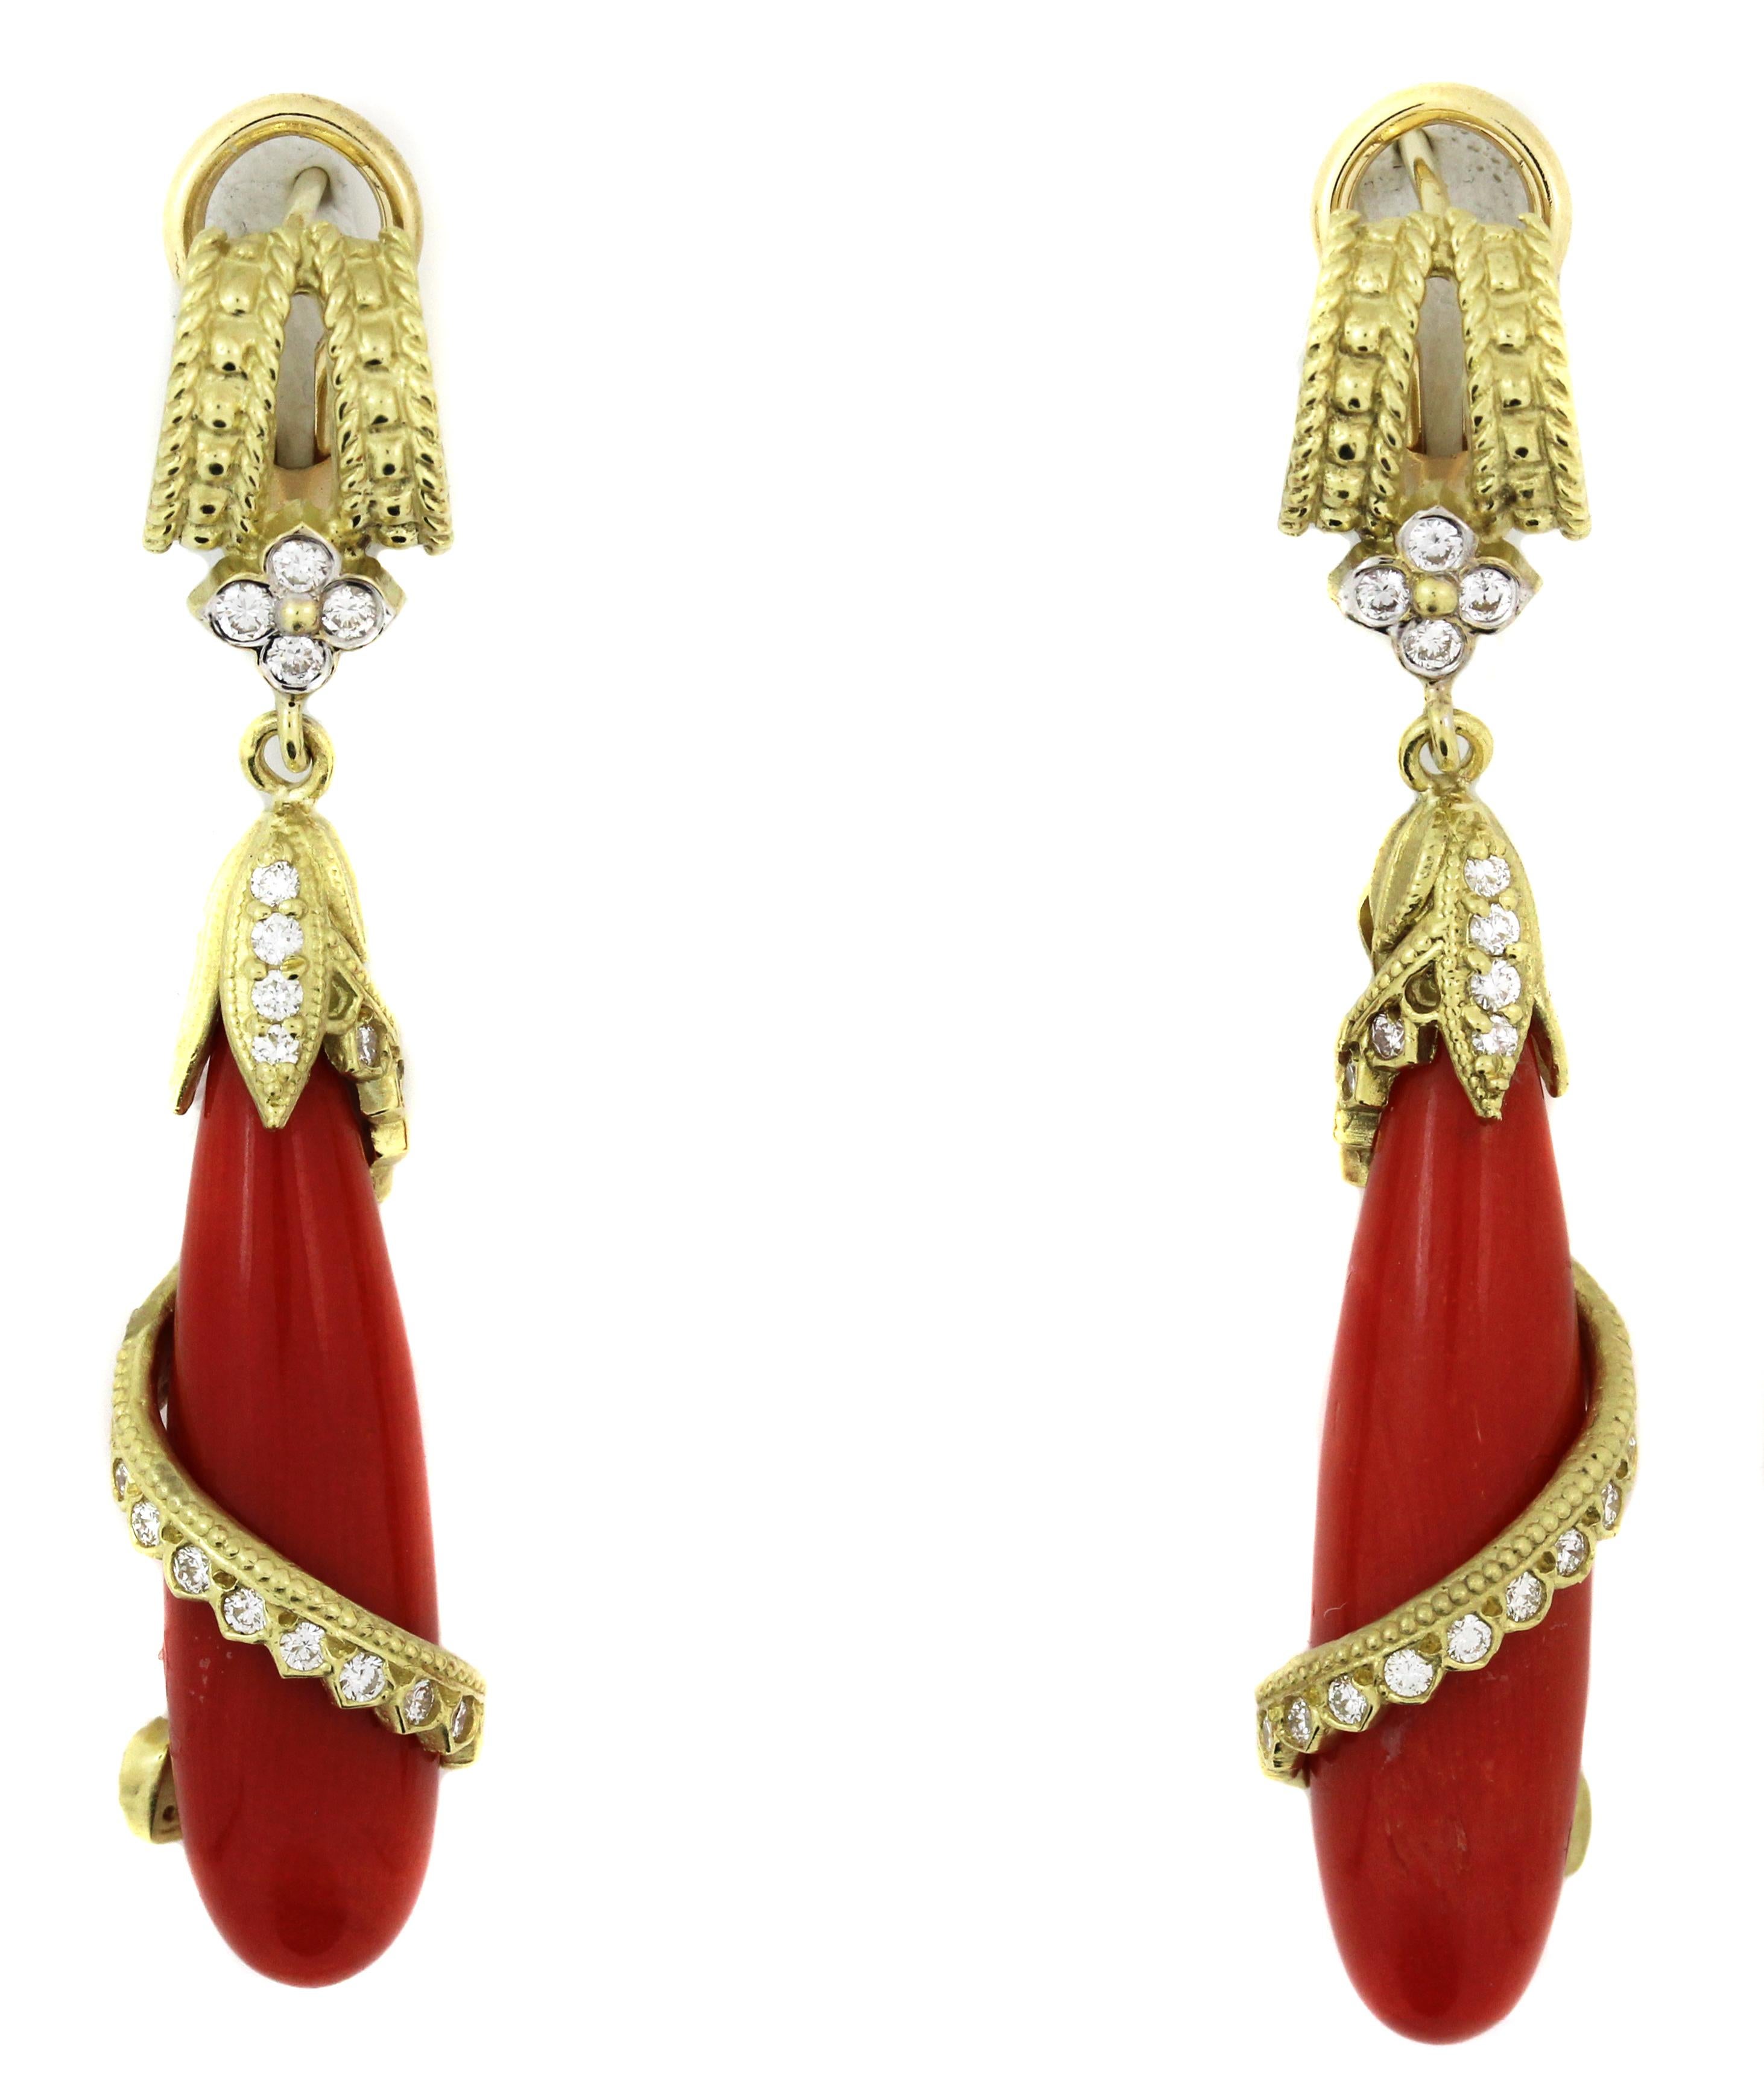 Twisted 18K Yellow Gold and Diamond Earrings with Coral Drops

Beautiful Sardinian Coral drops, 8mm x 30mm 

0.75ct. G Color, VS Clarity diamonds

Post-omega backs

Earrings are 2 inches in length

Has the Stambolian Diamond Heart

Made in USA